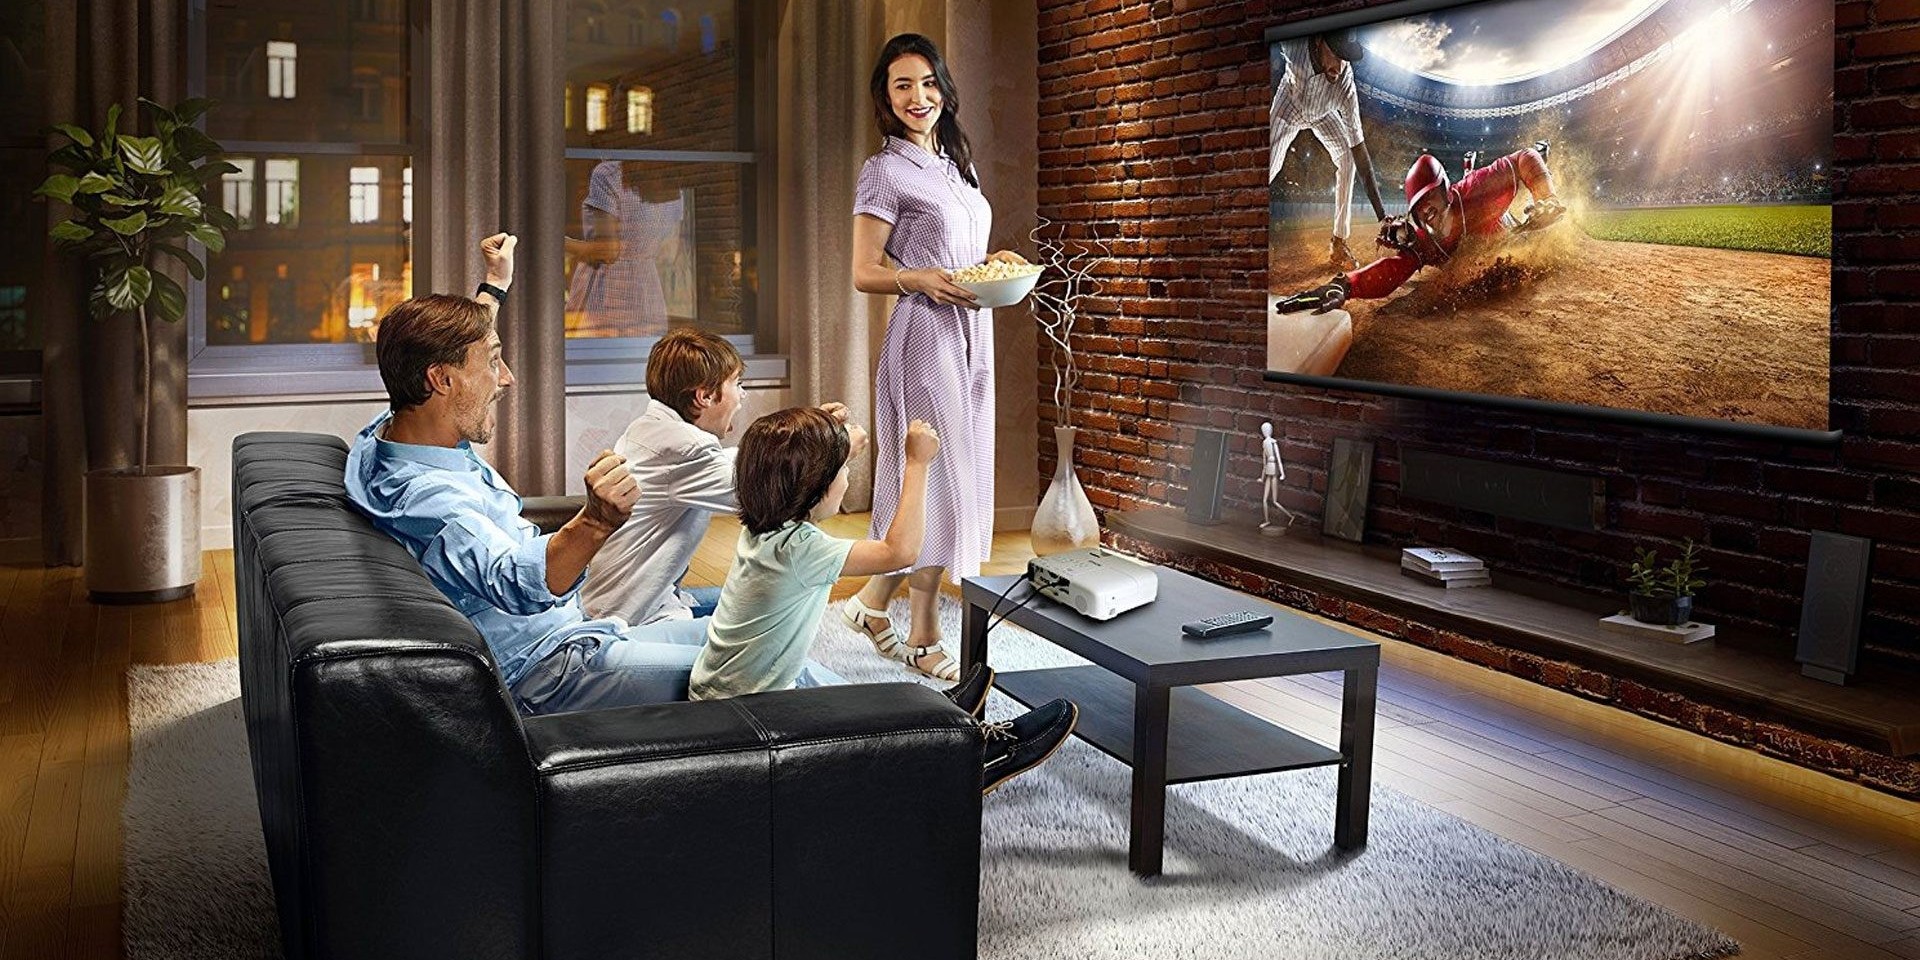 How to watch TV on projector without cable box